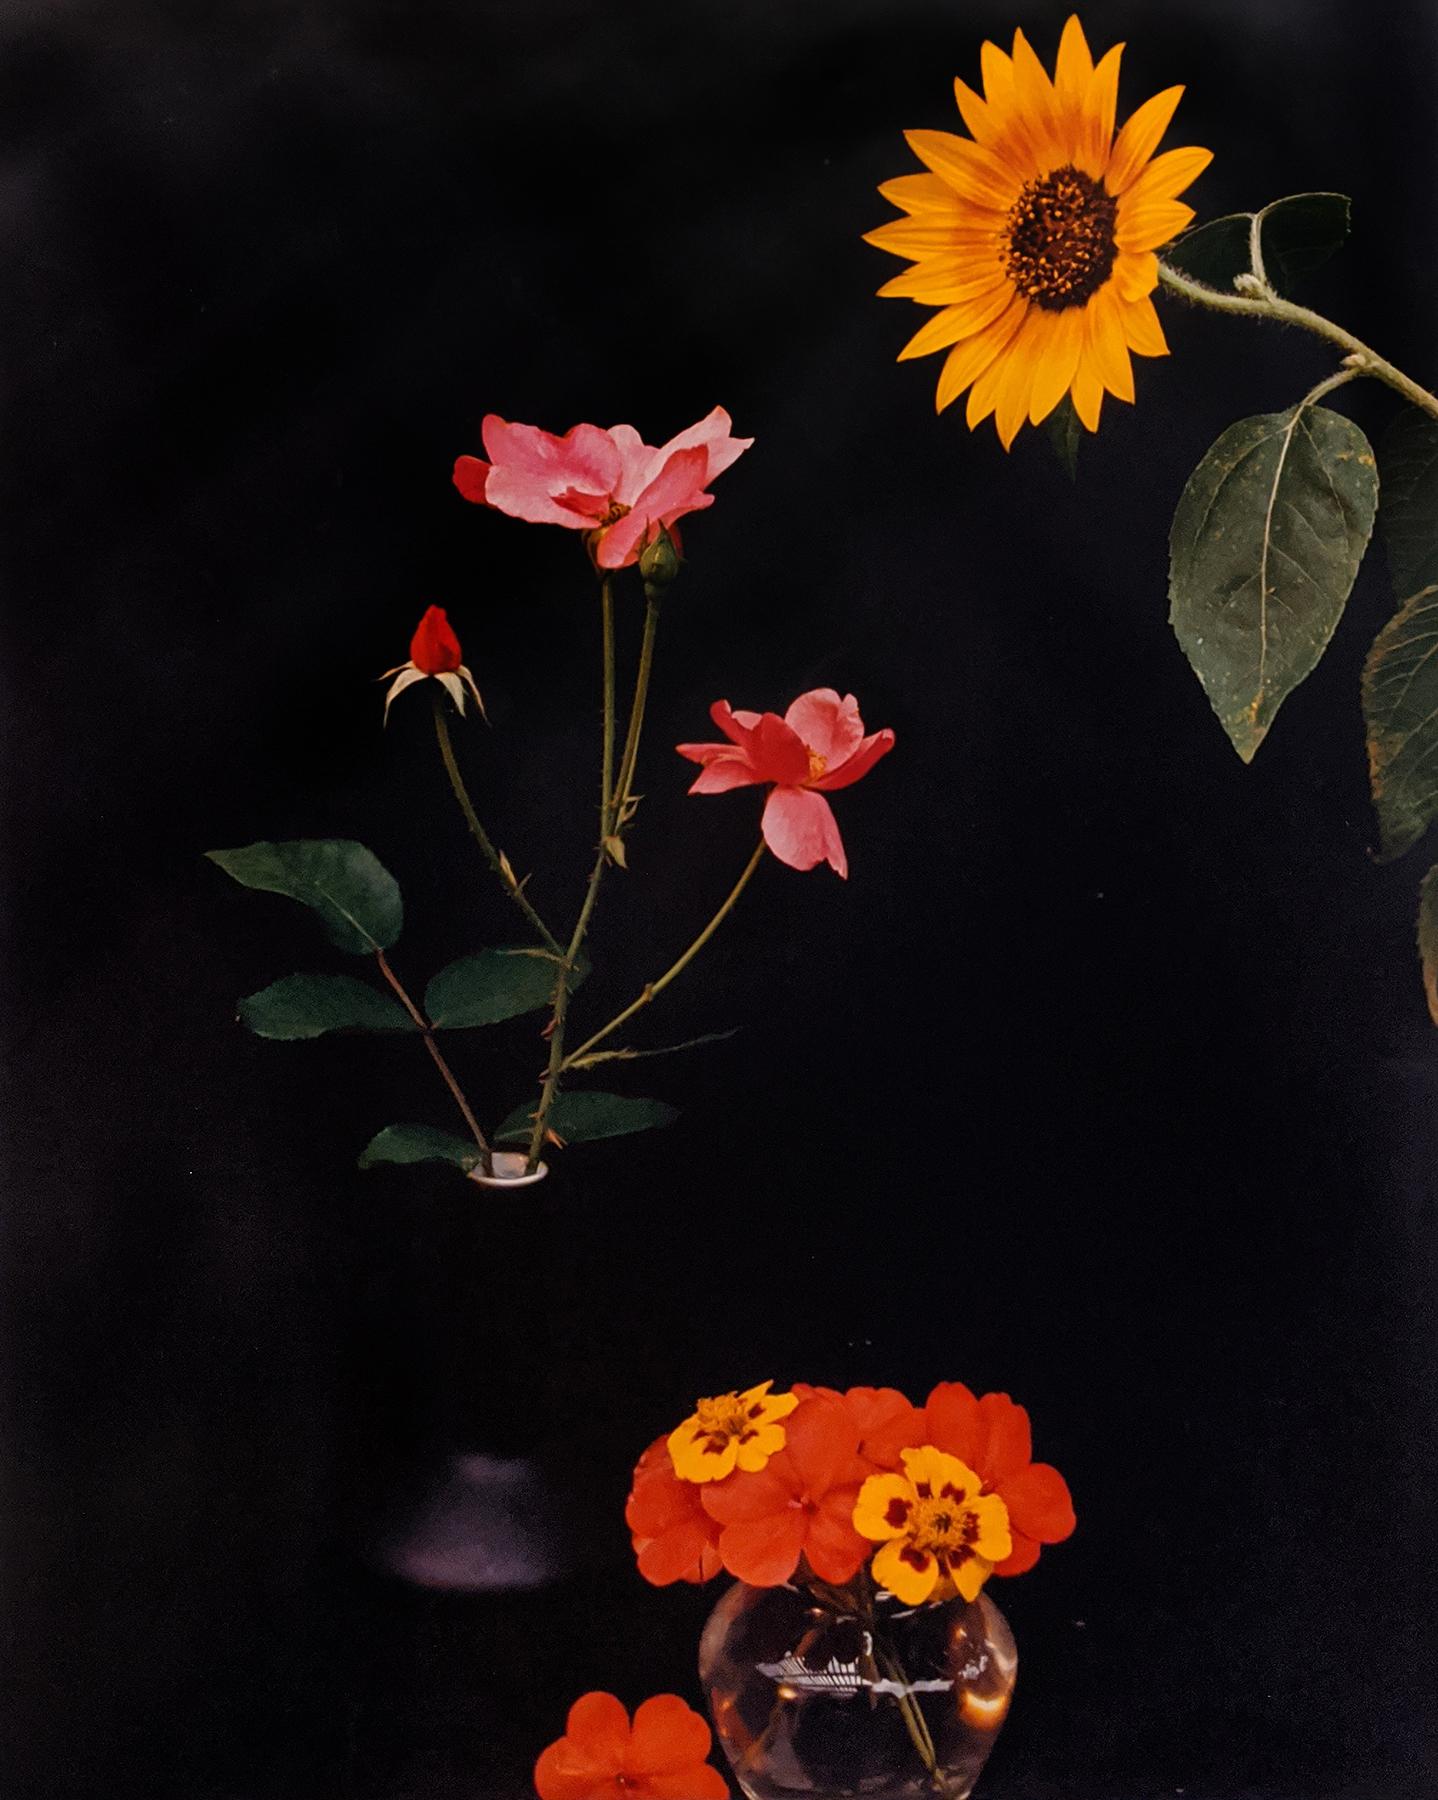 Horst P. Horst Color Photograph - Sunflower, Roses, and Poppies, c. 1985